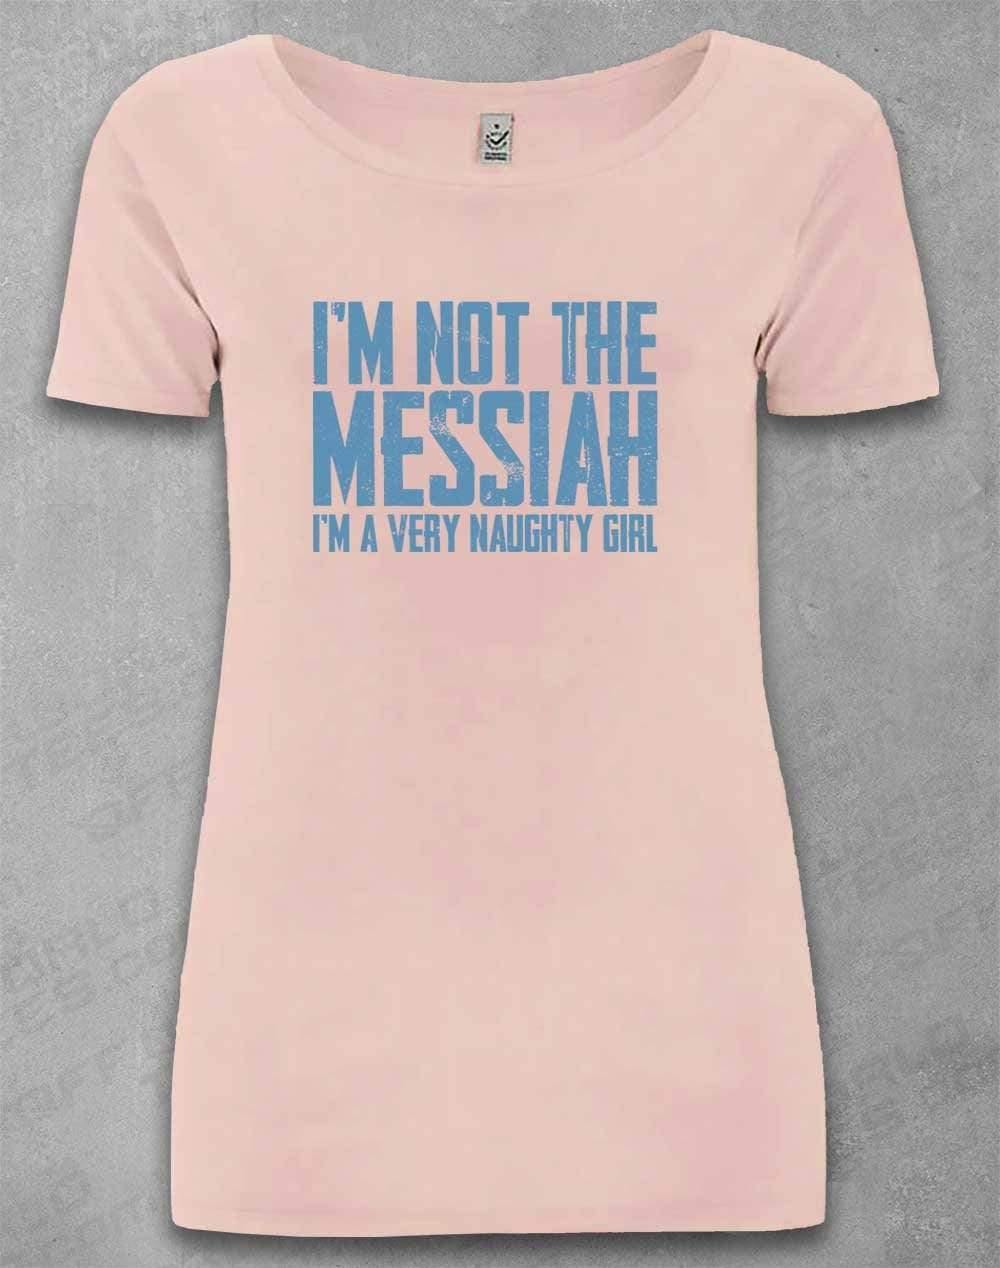 DELUXE I'm Not the Messiah I'm a Very Naughty Girl Organic Scoop Neck T-Shirt 8-10 / Light Pink  - Off World Tees